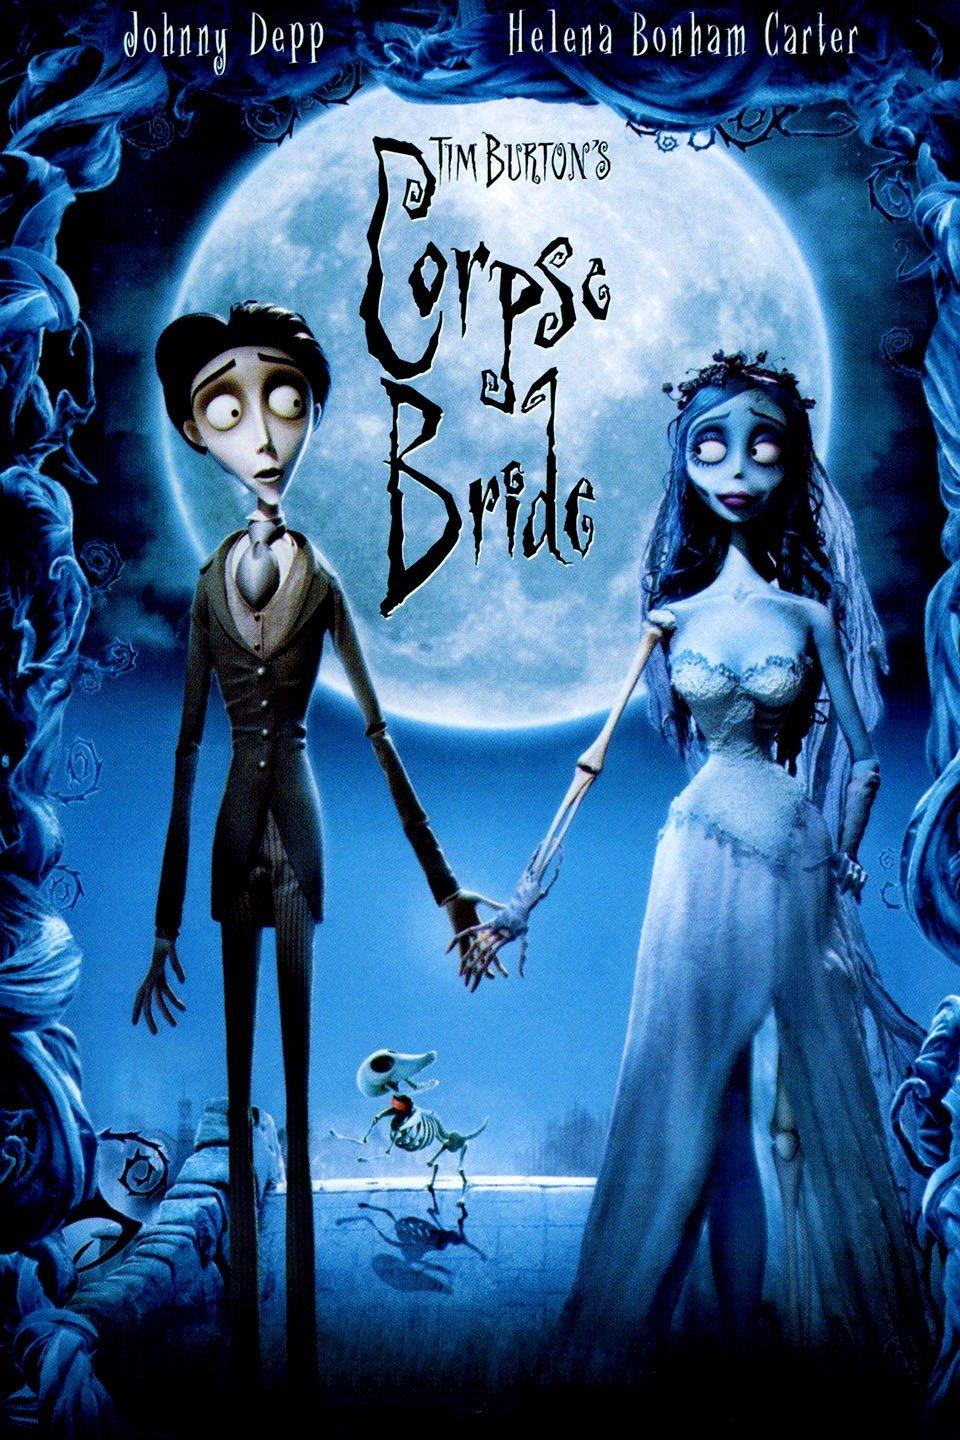 World Square Ghoul's Night Out Silent Cinema- Tim Burton's Corpse Bride